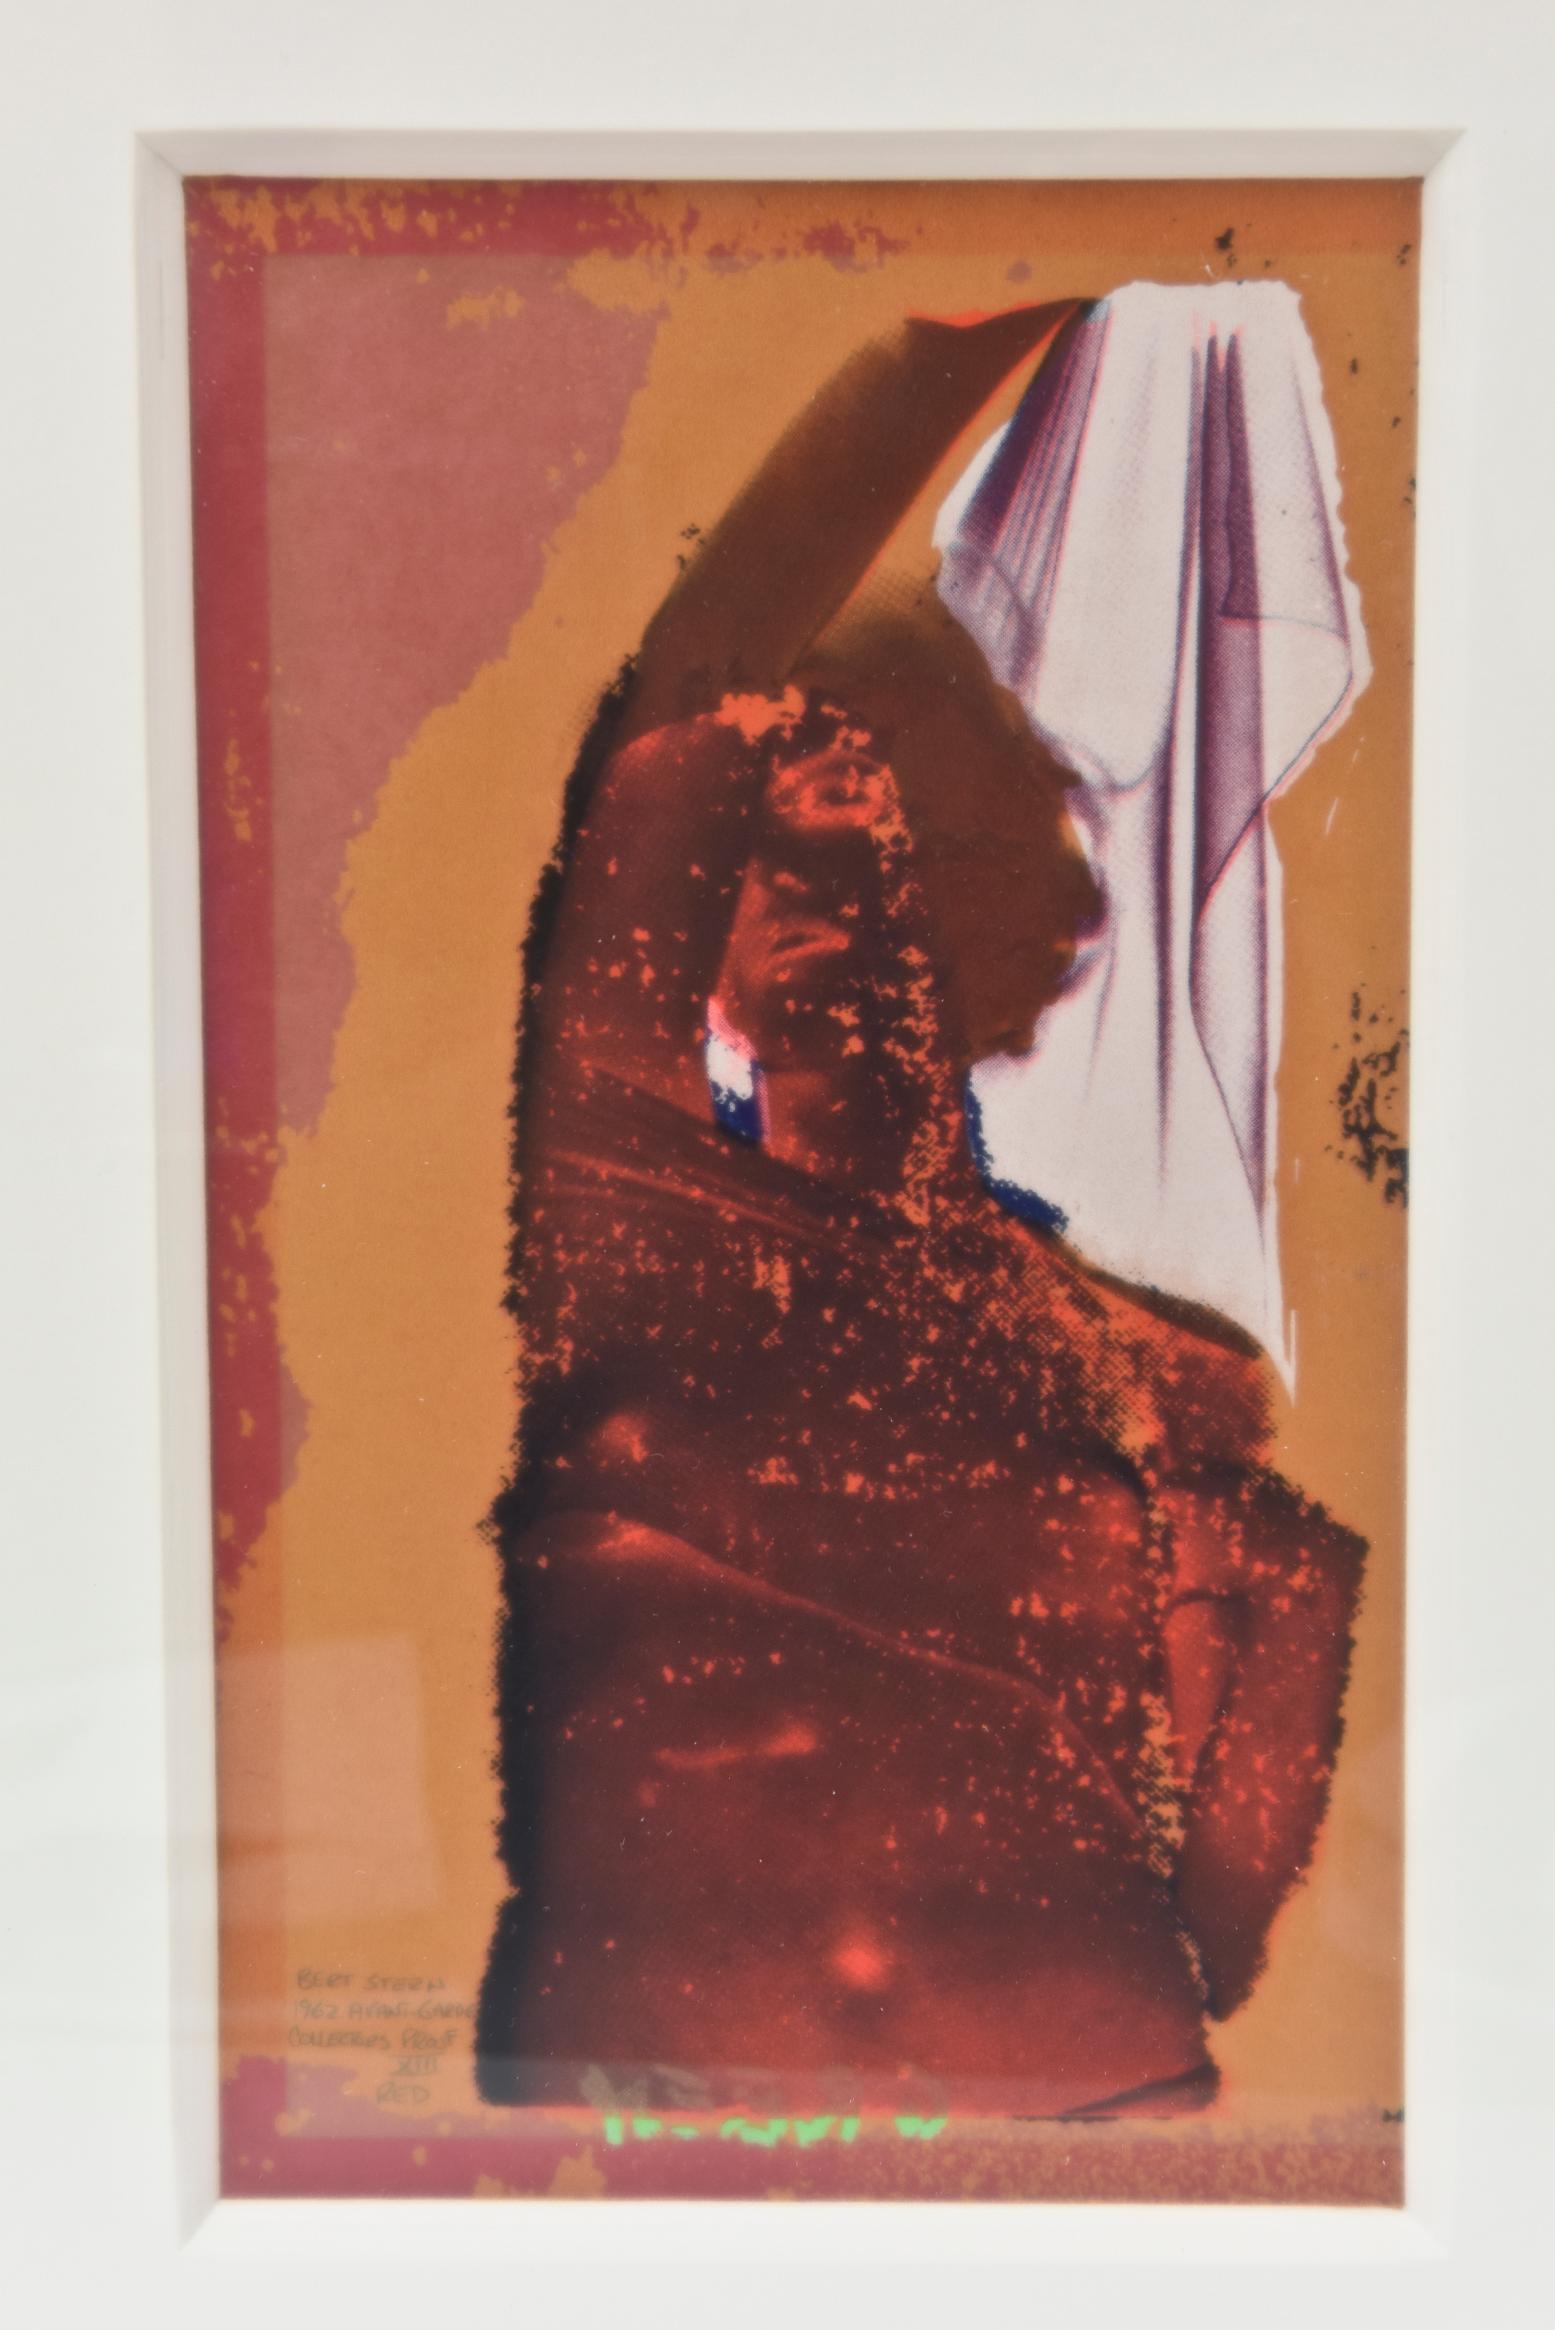 This signed Bert Stern vintage silkscreen and serigraph of an abstract Marilyn Monroe is from 1962. It is marked Avant Garde Collectors Proof X111 Red.
It has been newly and tastefully custom framed with a white shadow box and a deep ply white